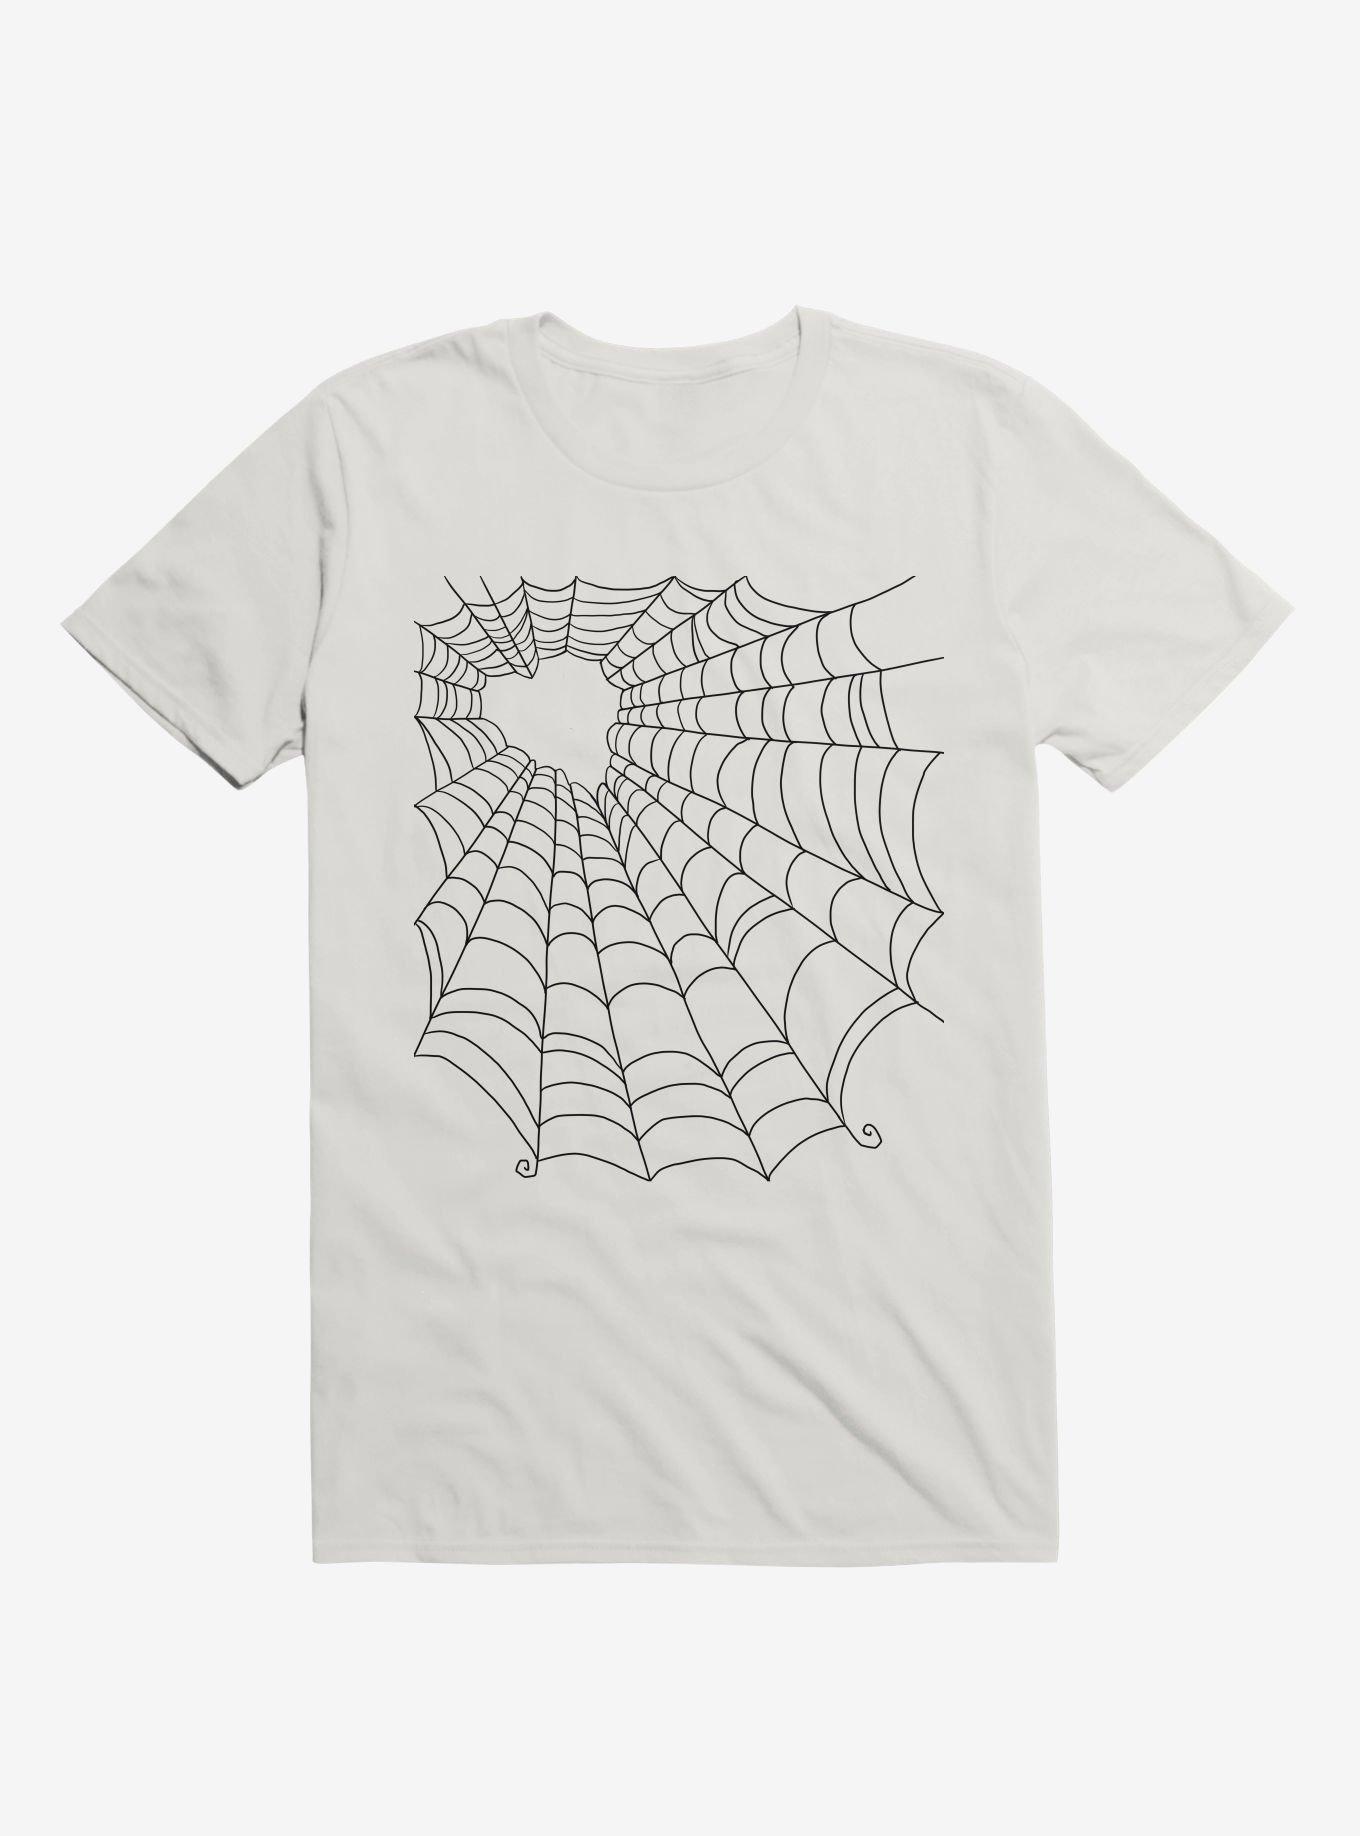 Caught You In My Black Hearted Web White T-Shirt, WHITE, hi-res